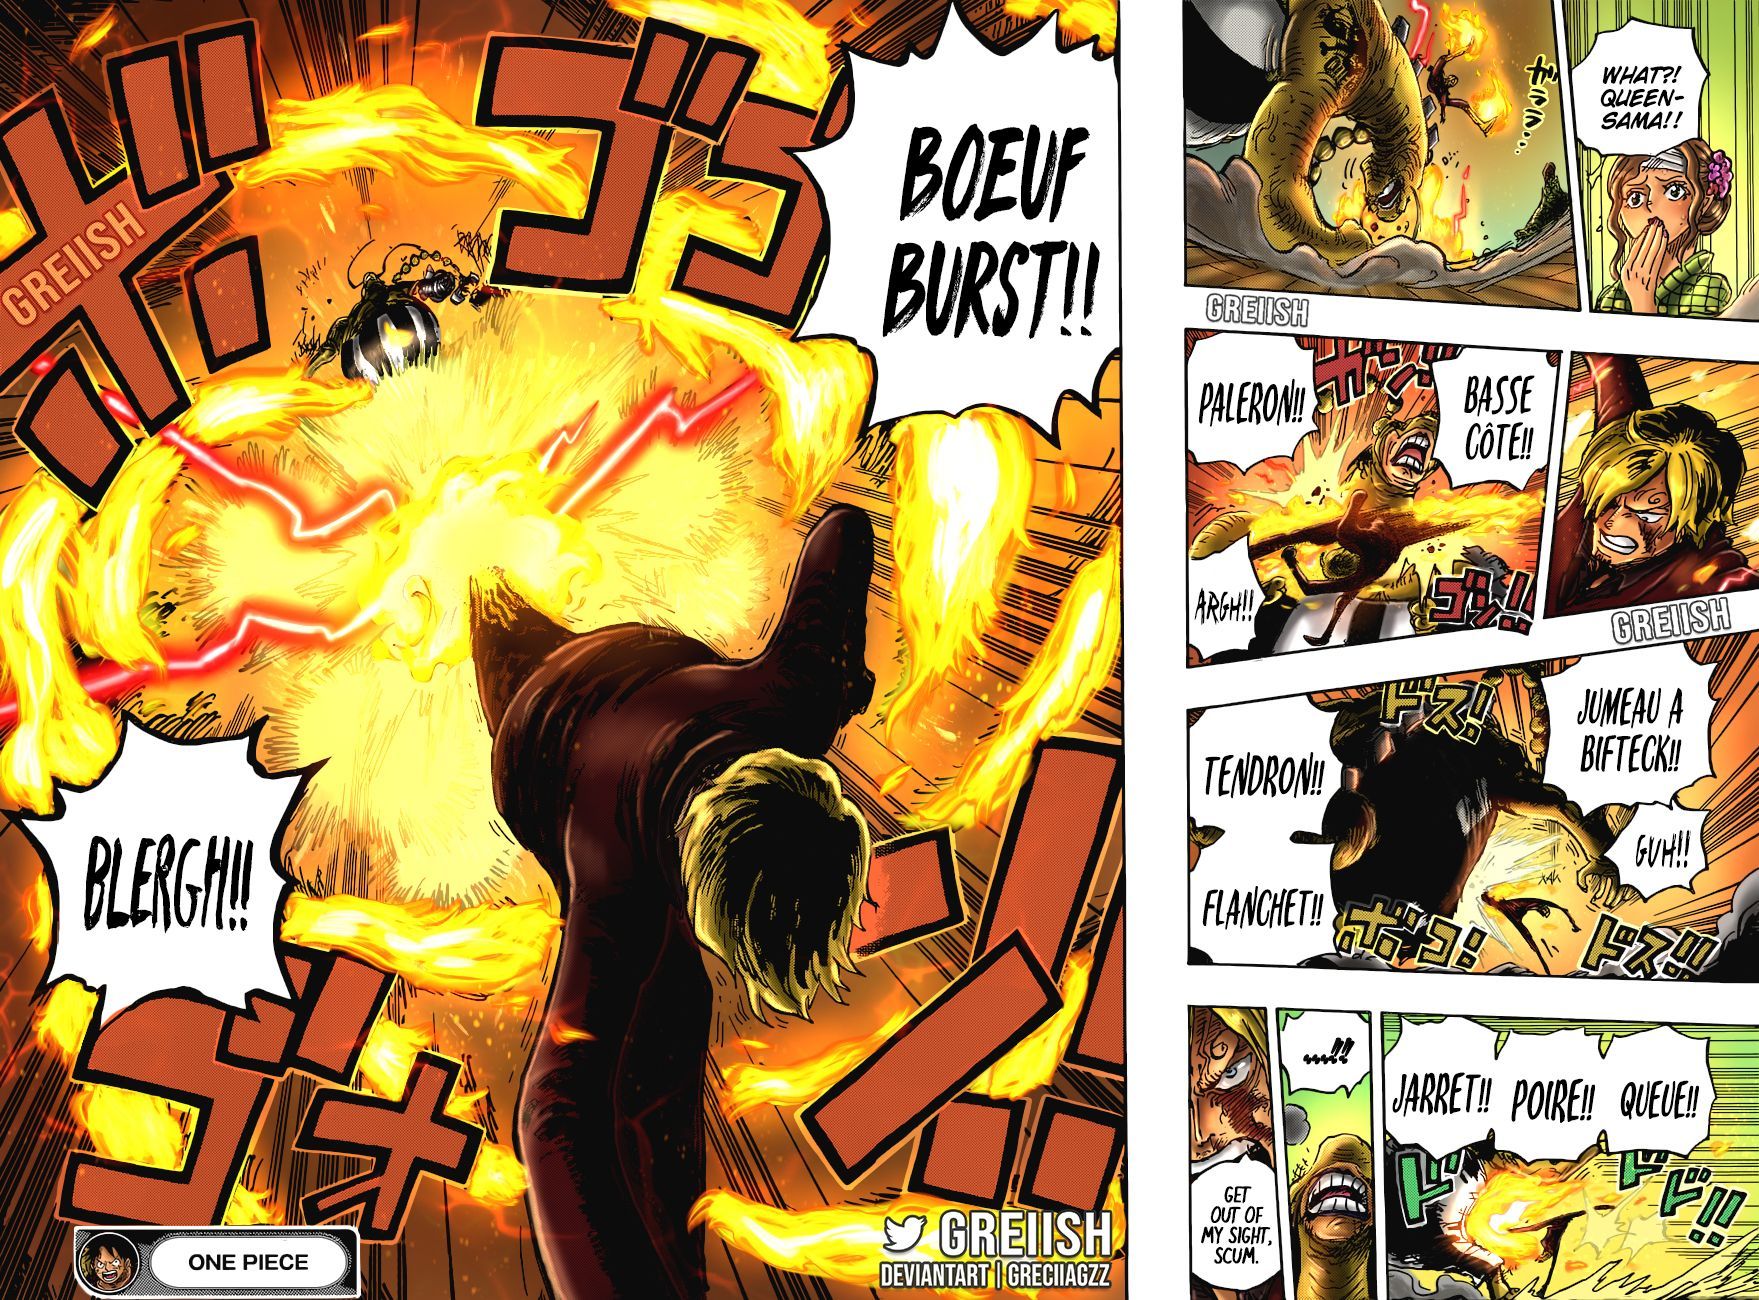 One Piece Anime Episode 1053 Spoilers: Sanji's Technological Power!